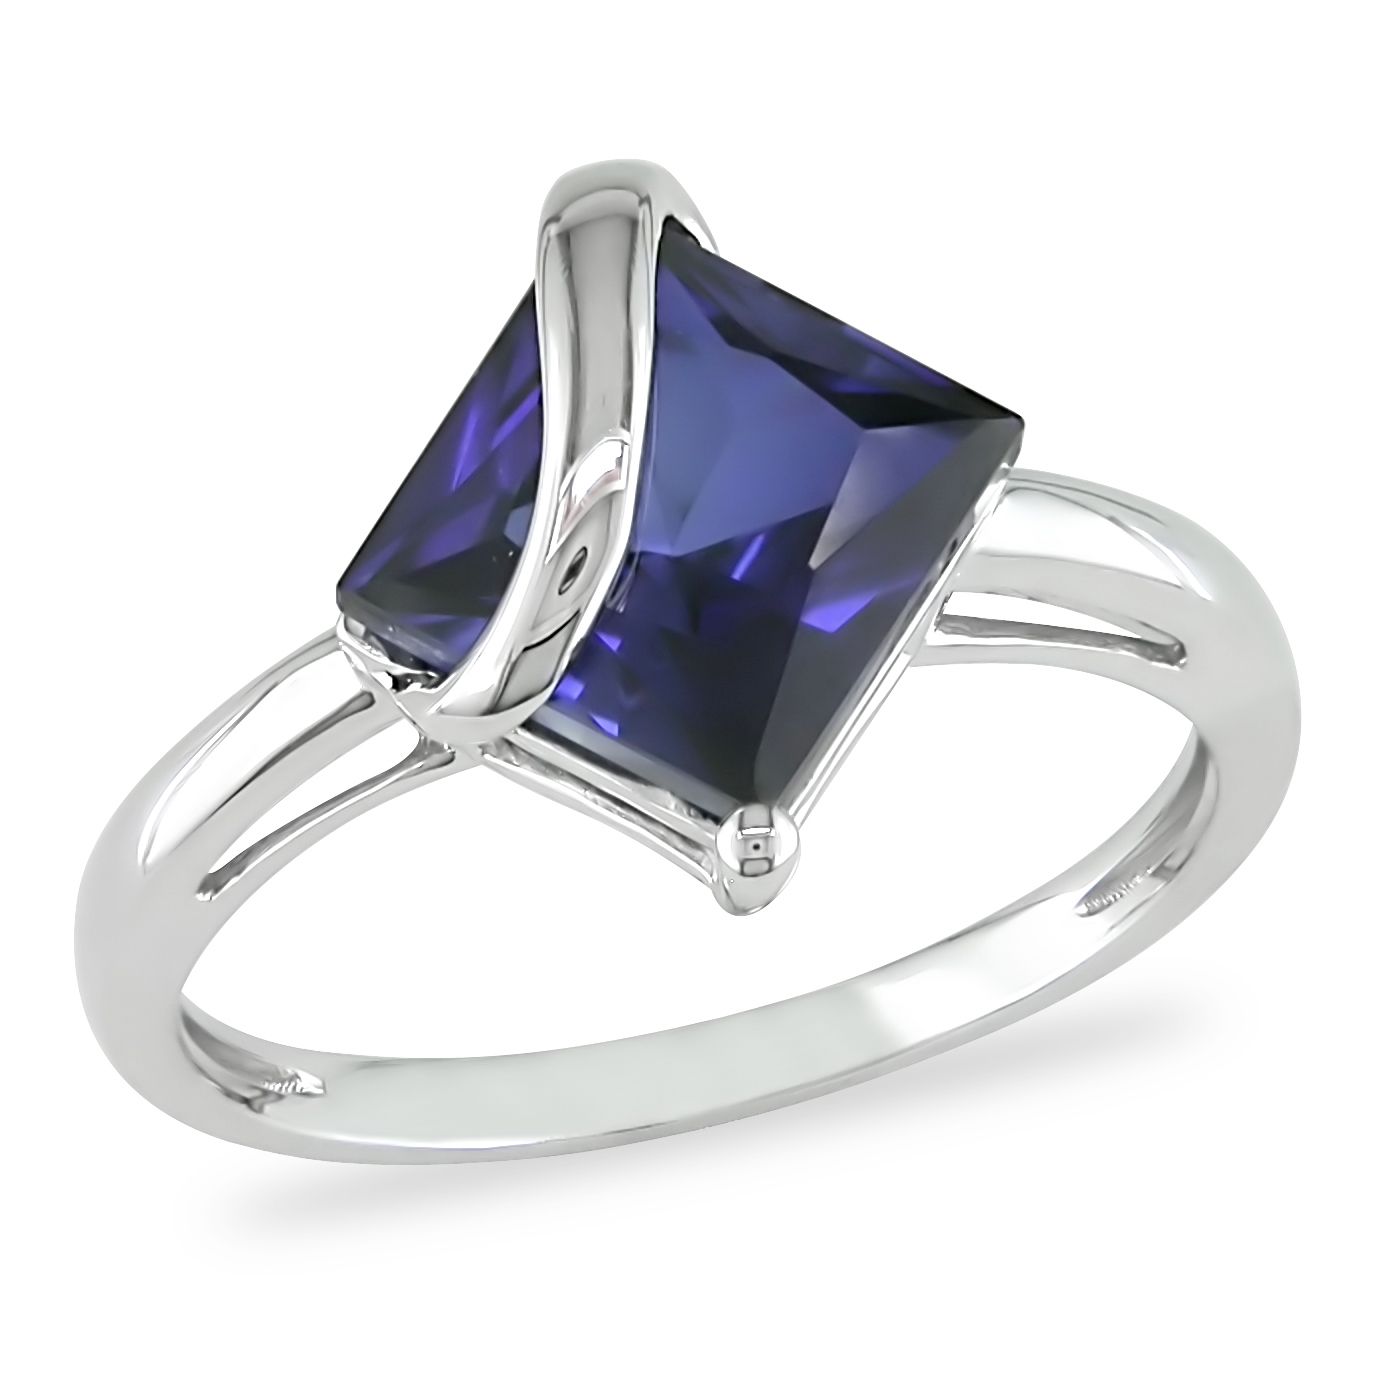 3 ct. t.w.* Created Sapphire Fashion Ring in 10k White Gold